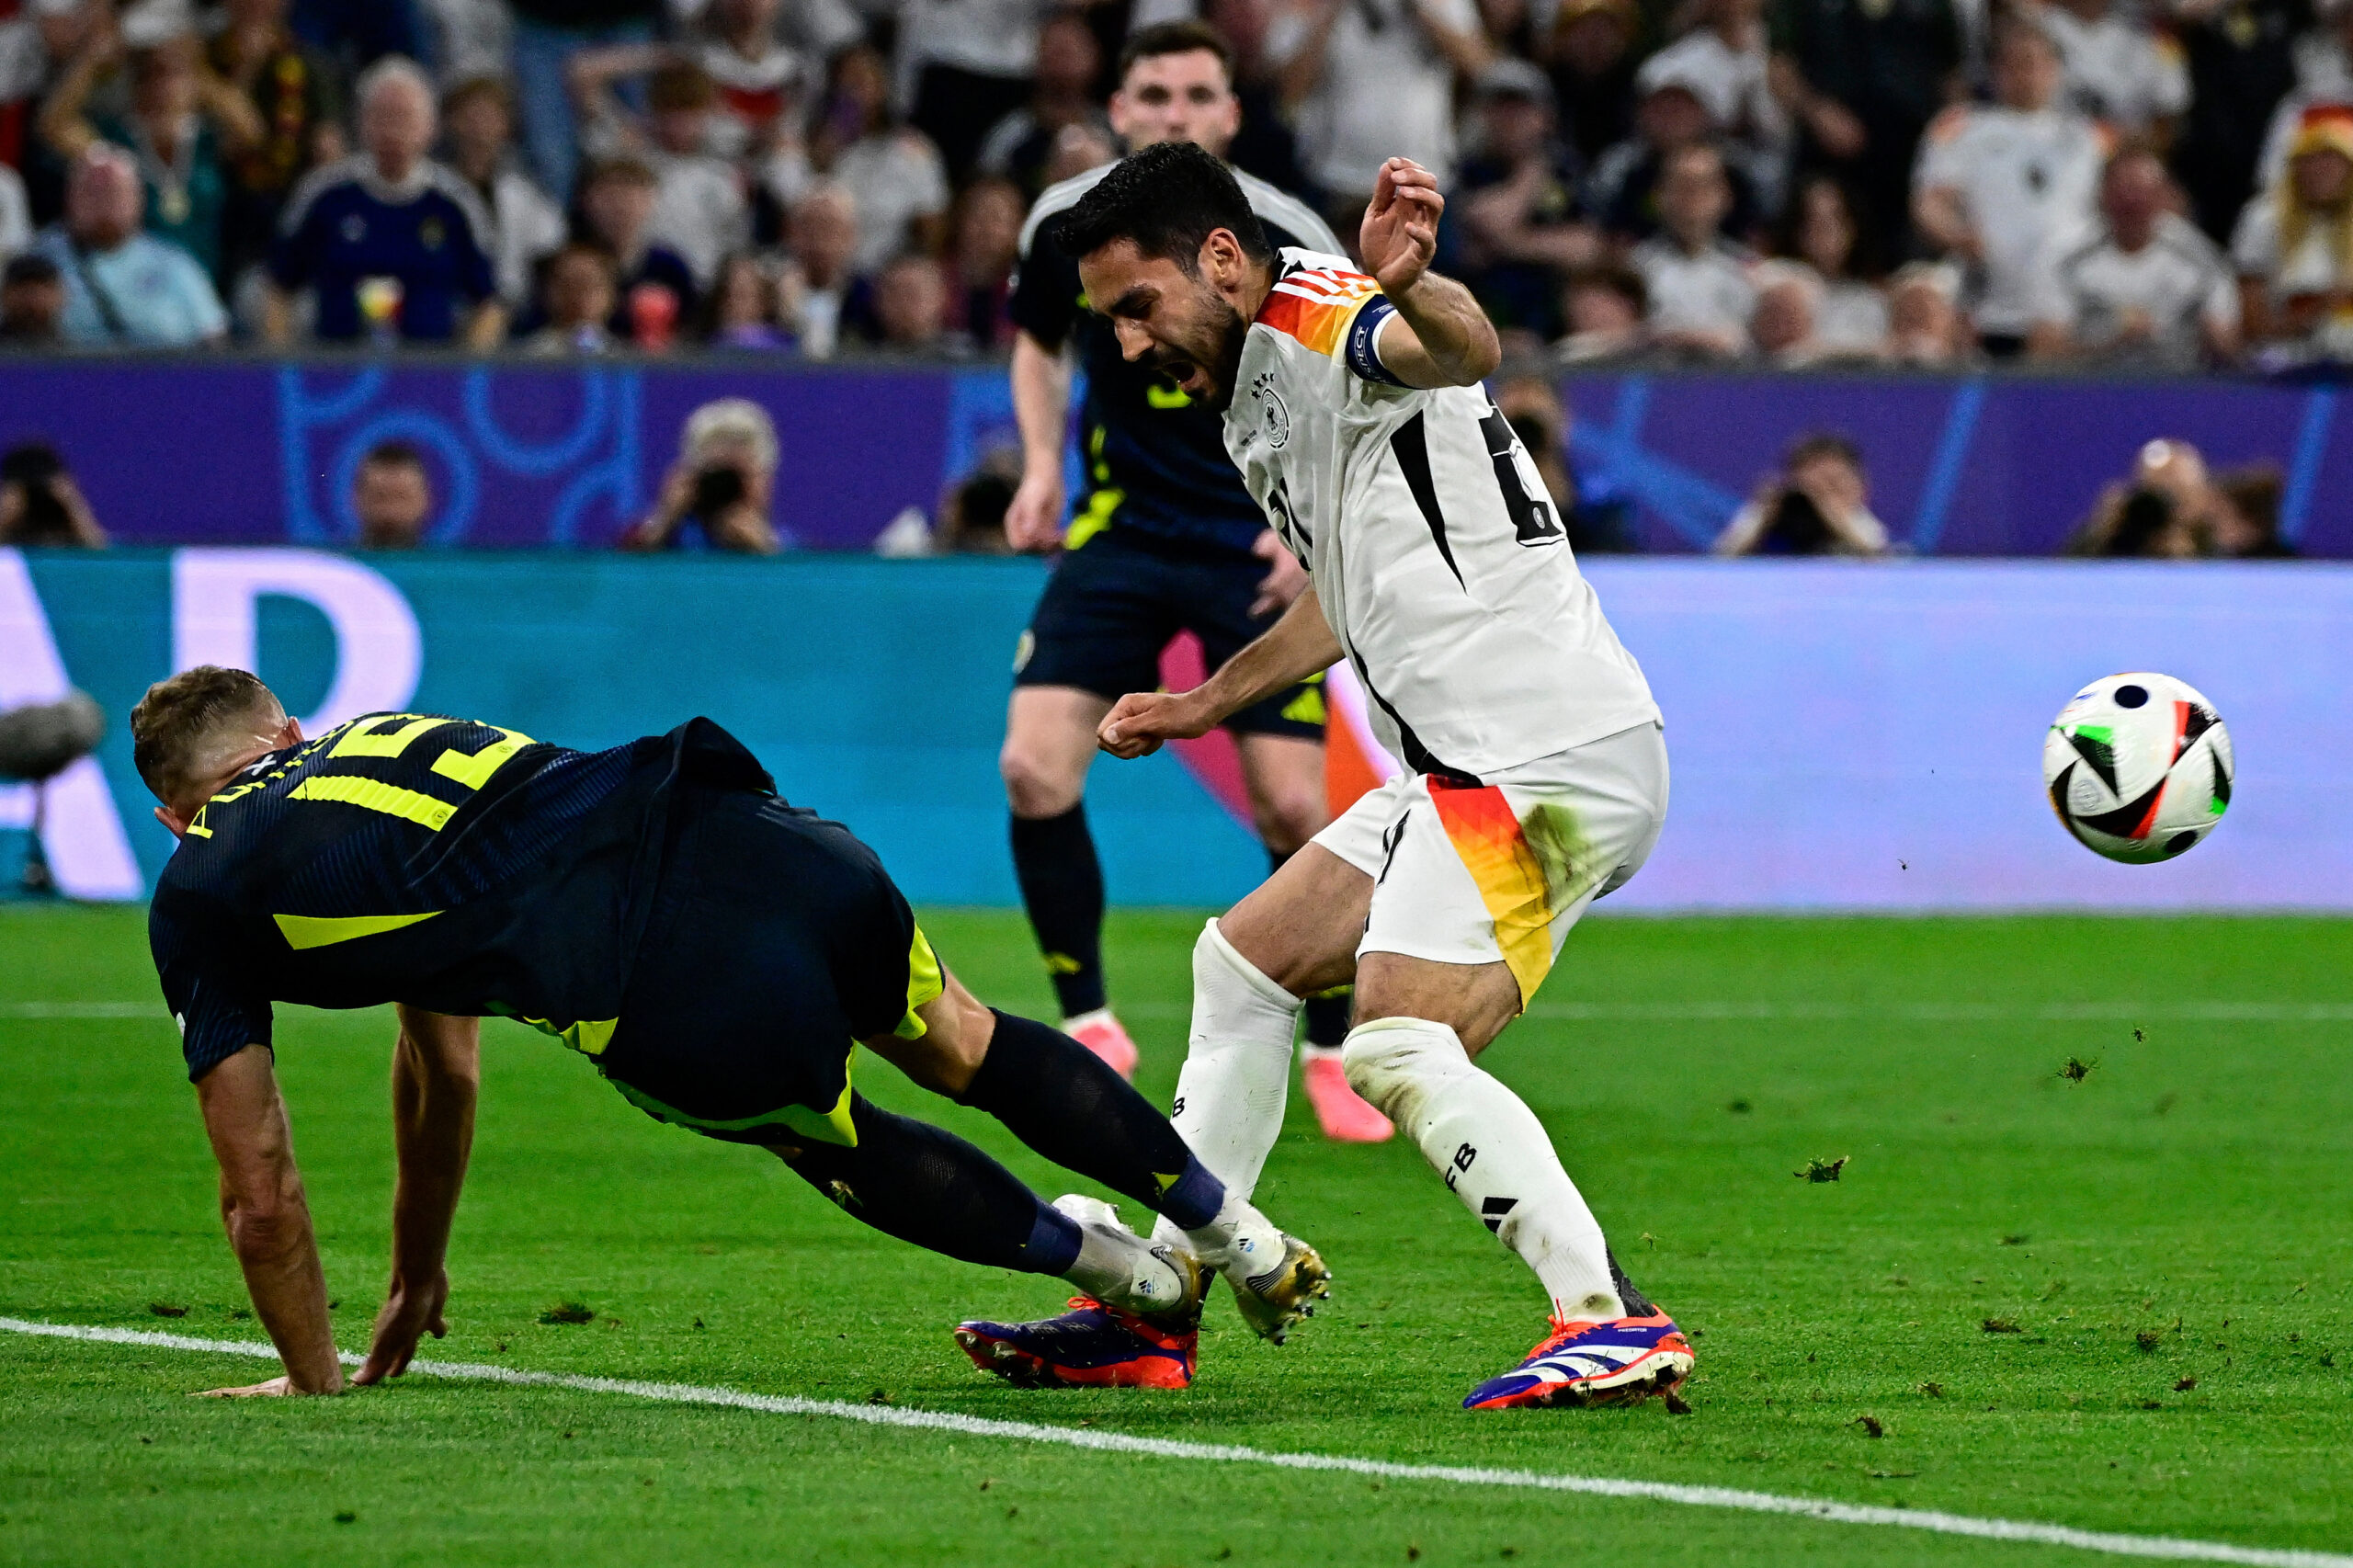 TOPSHOT - Scotland's defender #15 Ryan Porteous (L) fouls Germany's midfielder #21 Ilkay Gundogan (R) for a penalty and a red card during the UEFA Euro 2024 Group A football match between Germany and Scotland at the Munich Football Arena in Munich on June 14, 2024.